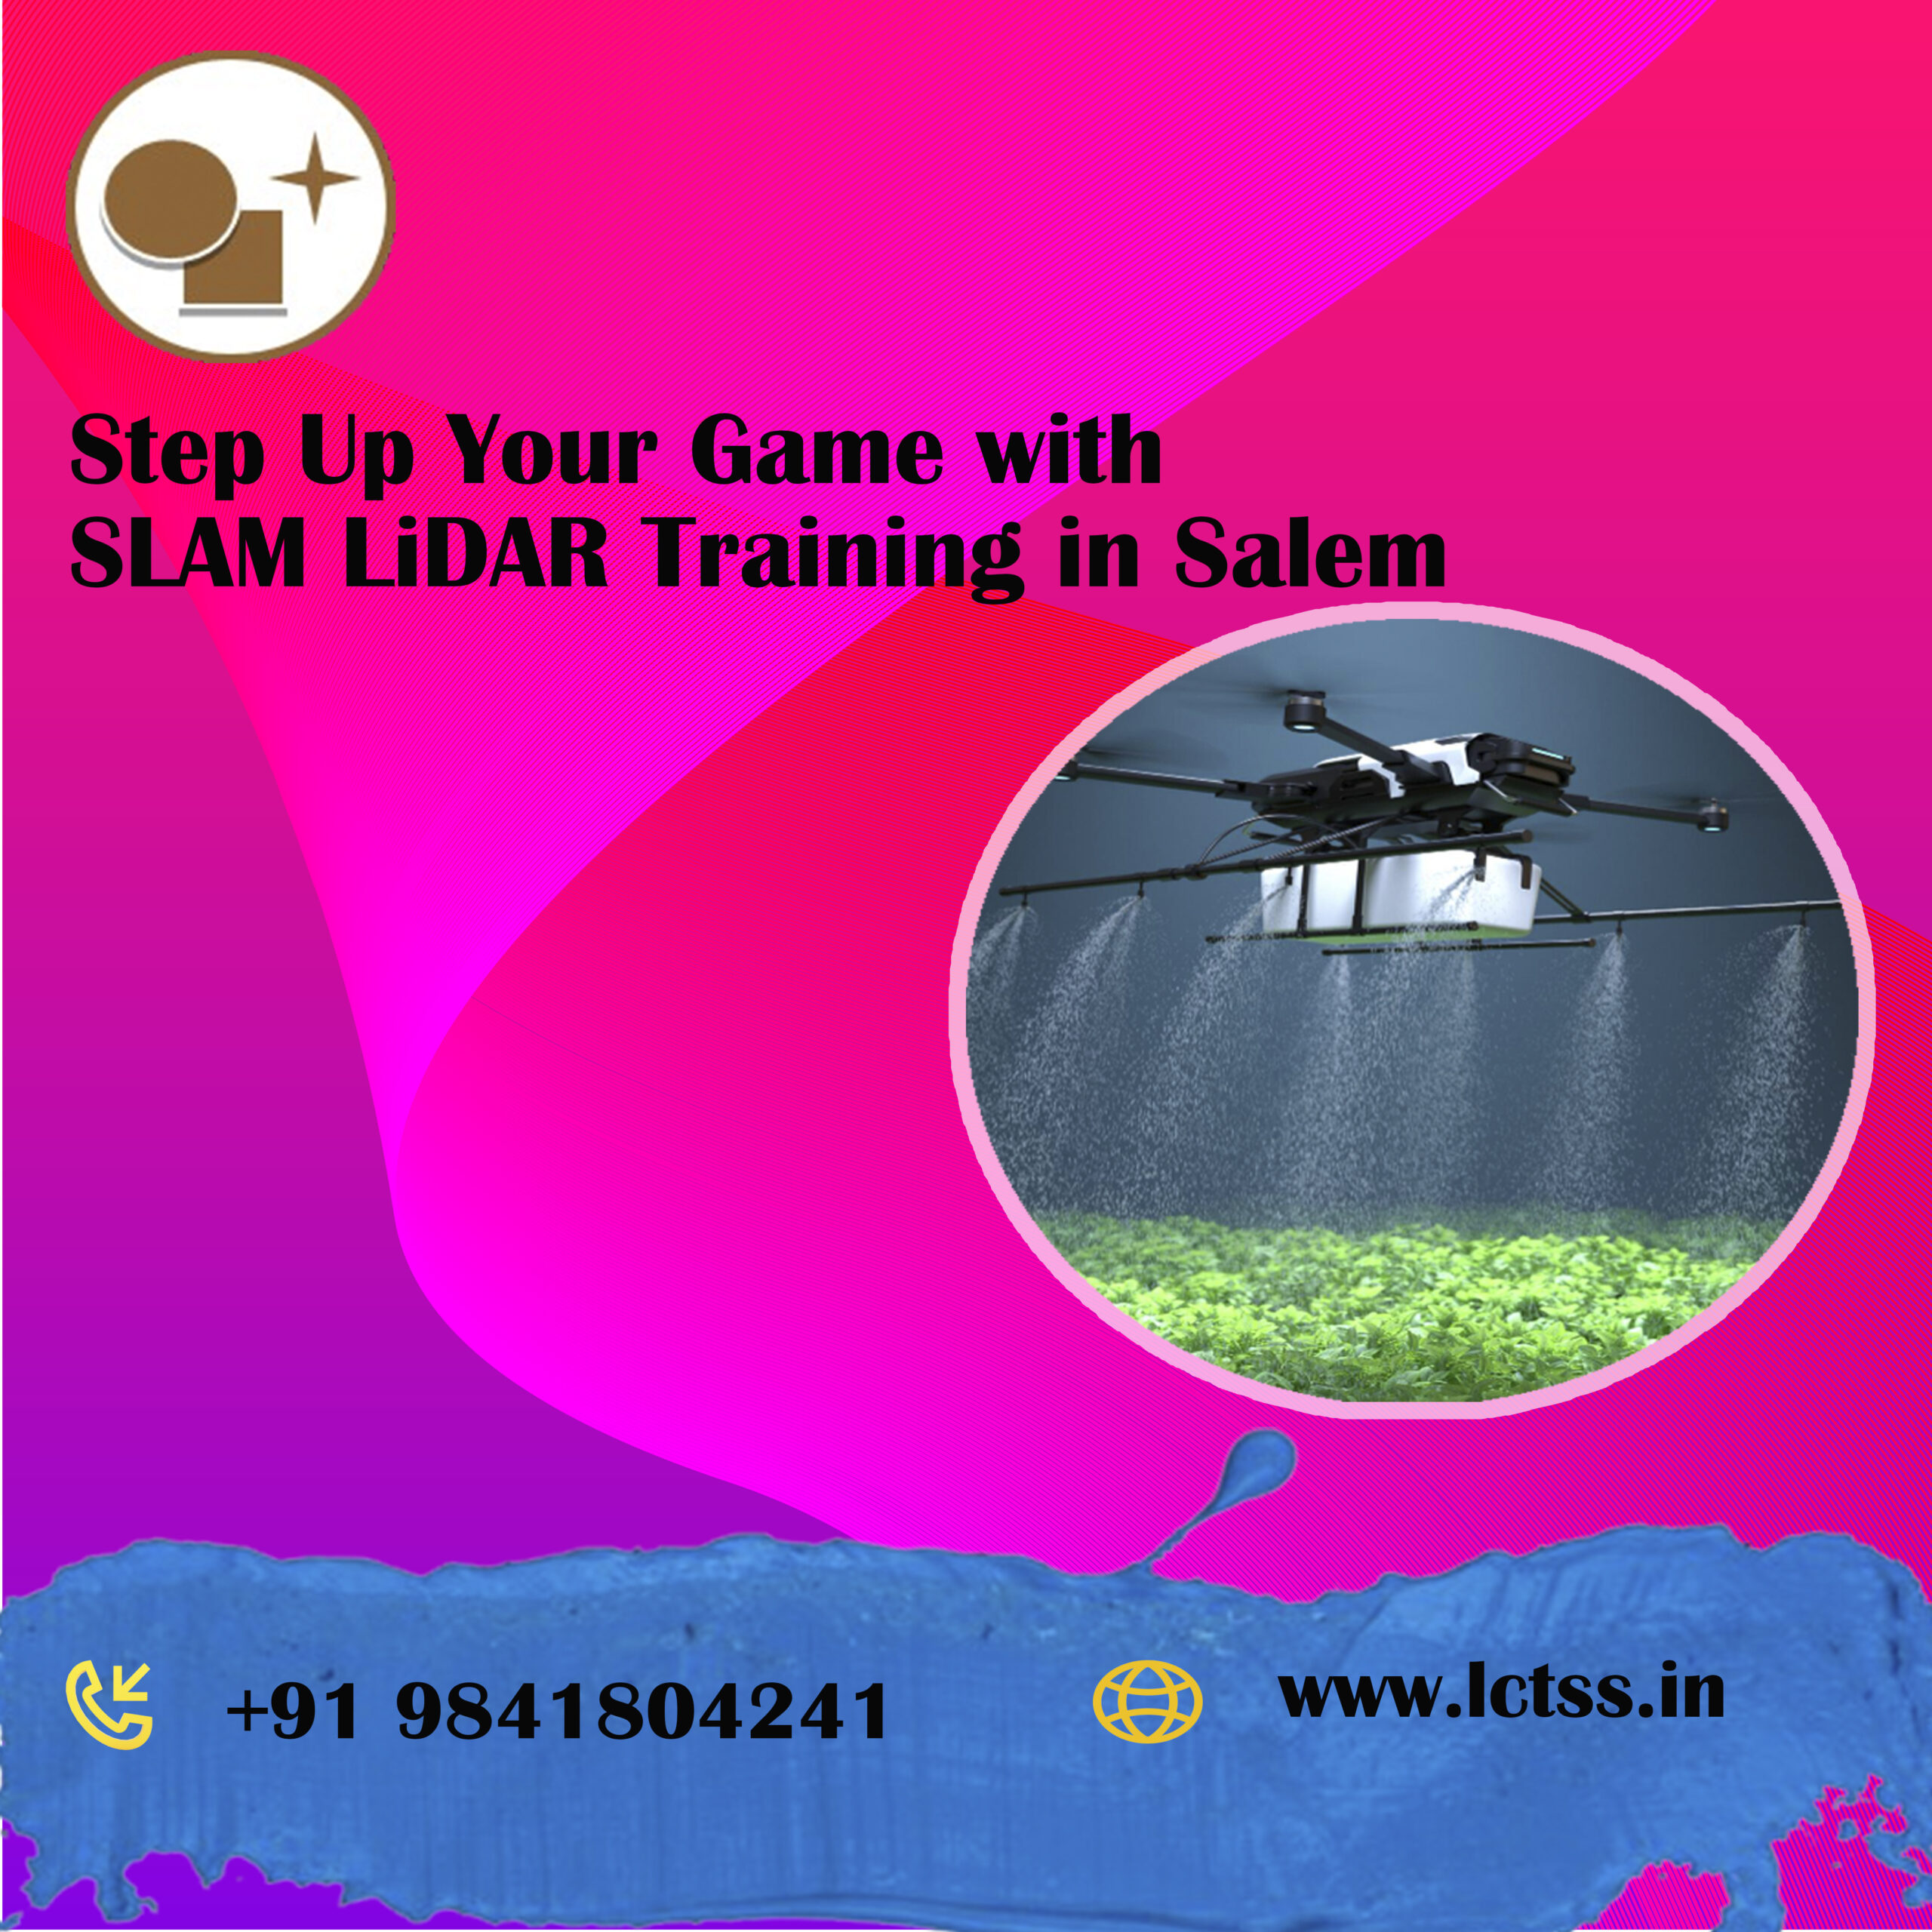 Step Up Your Game with SLAM LiDAR Training in Salem